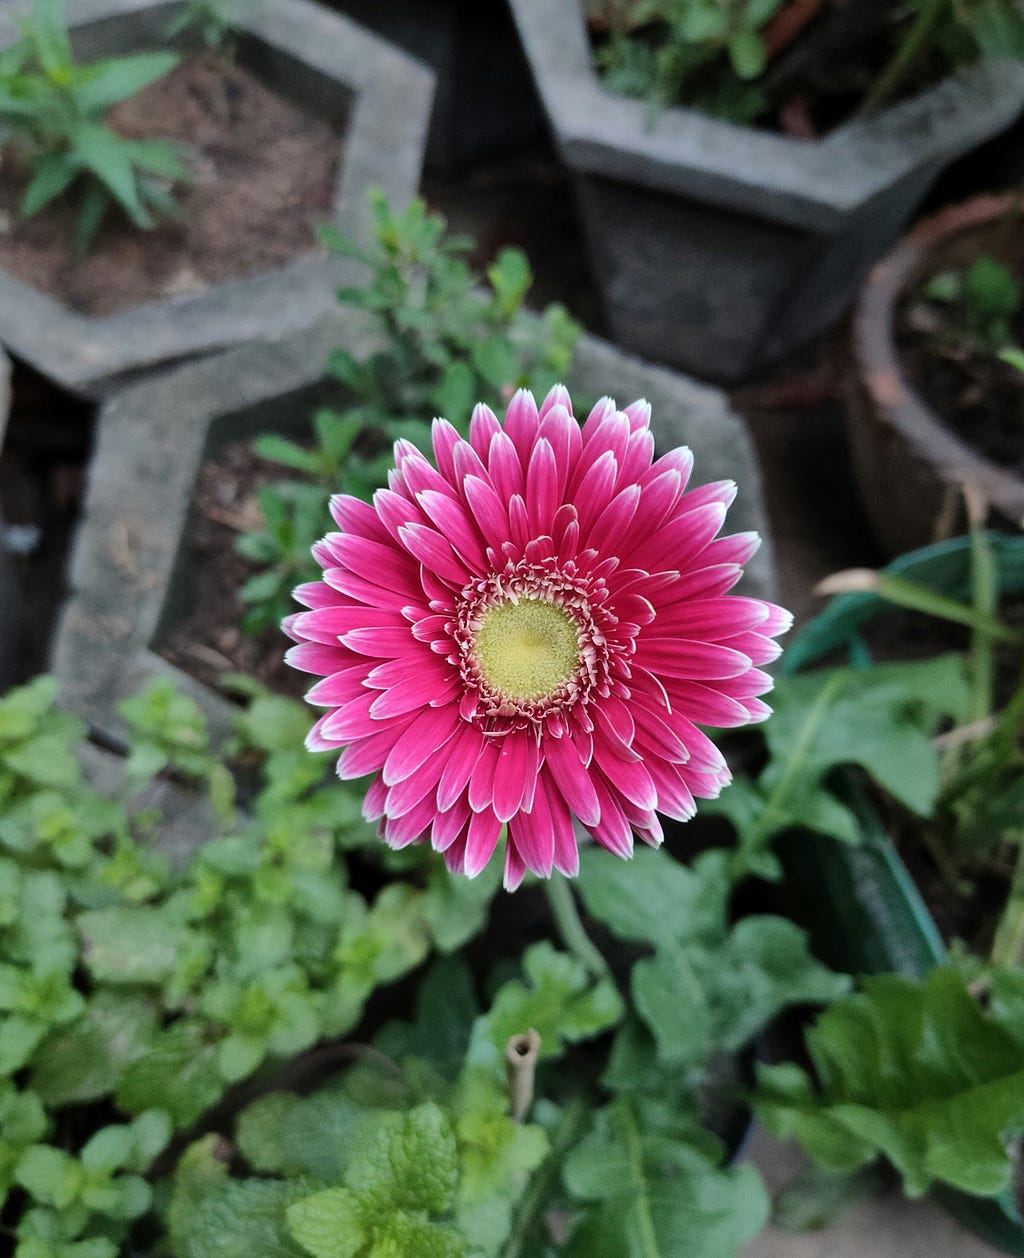 Pink flower with a yellow green center